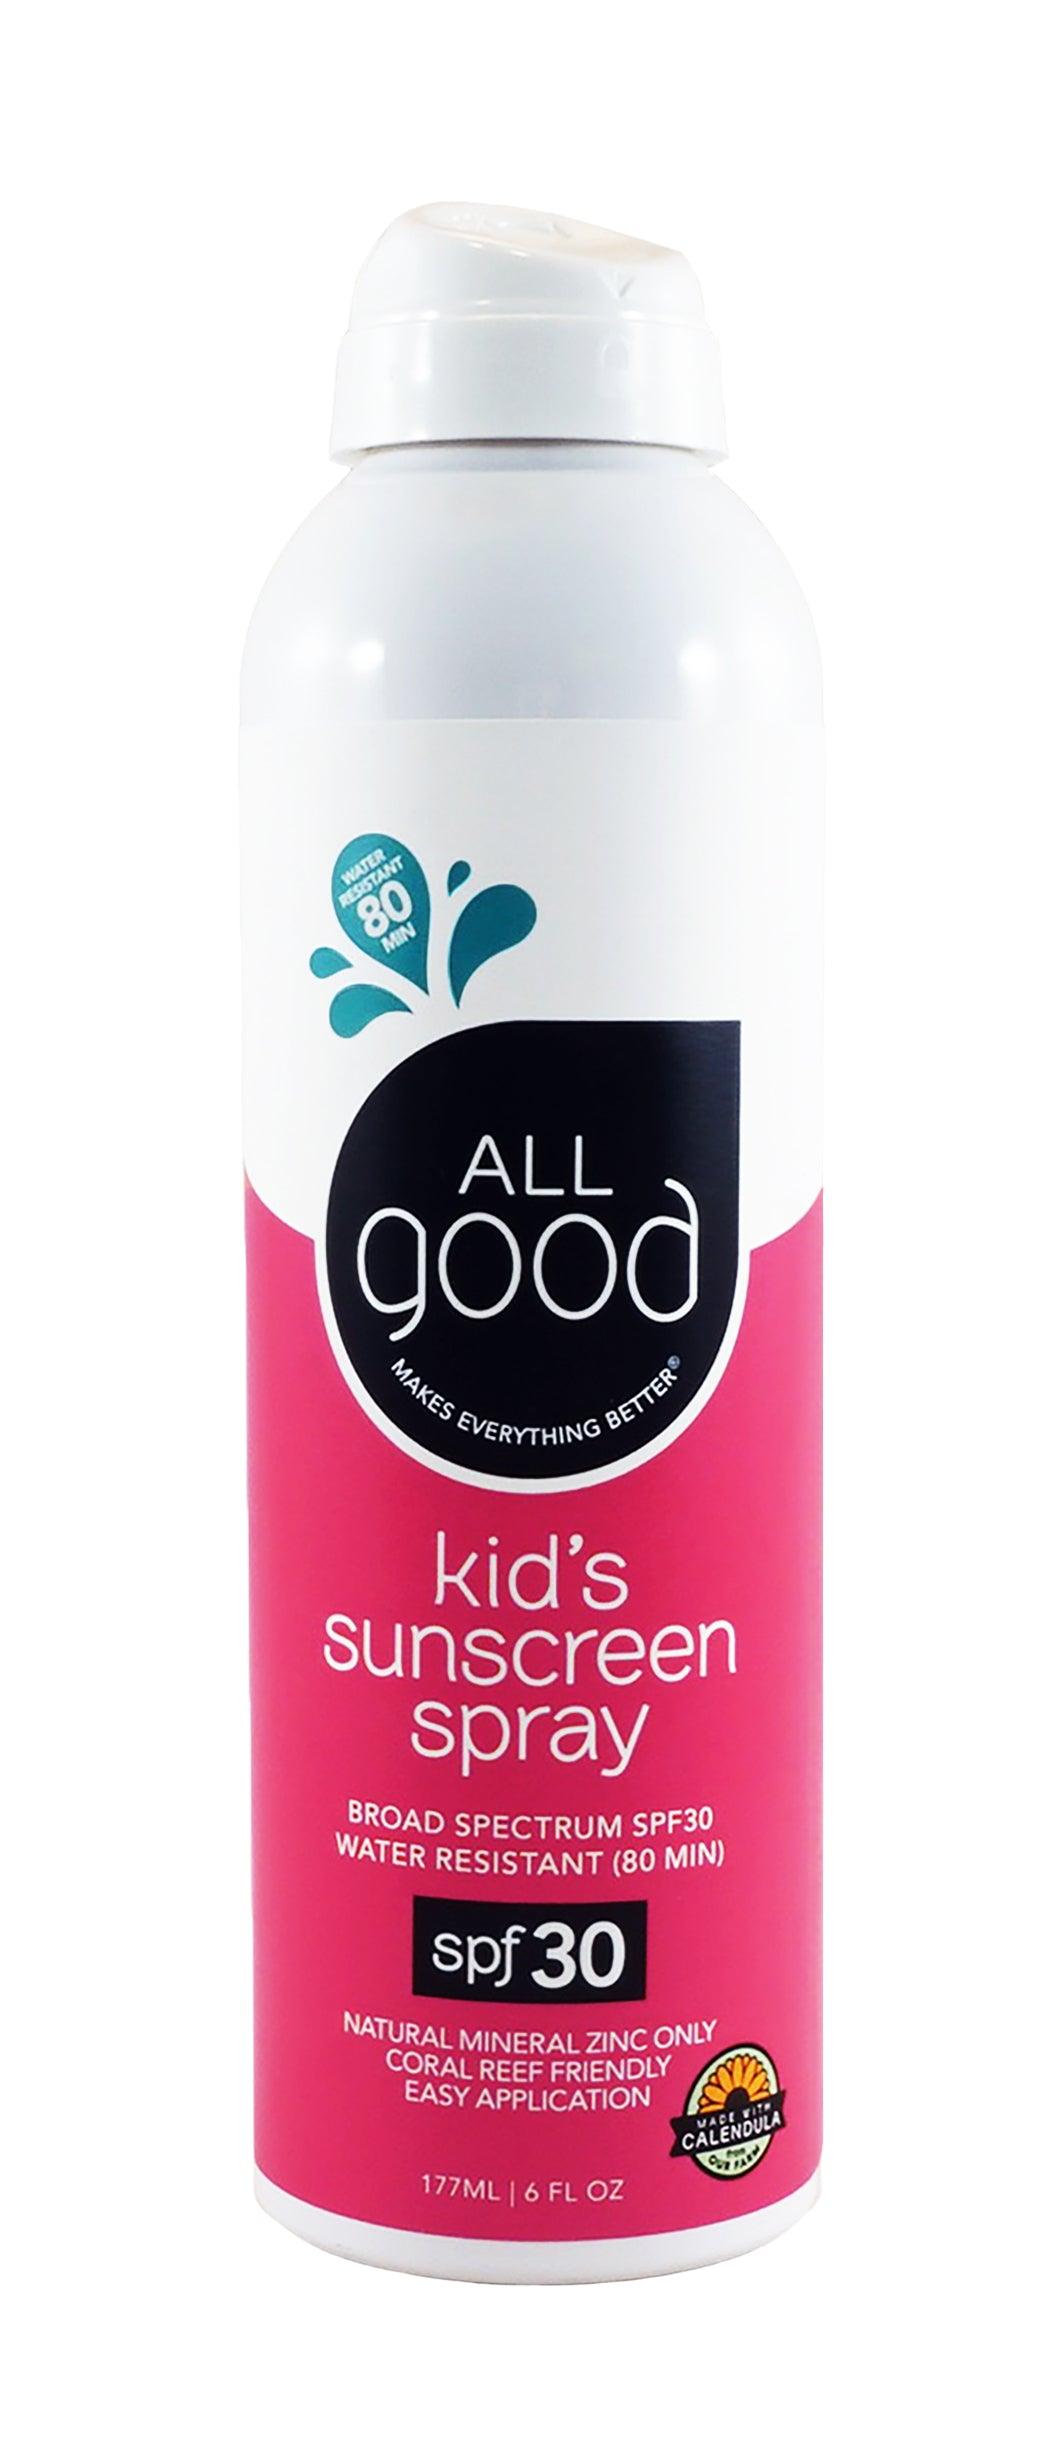 Sunscreen Products Online